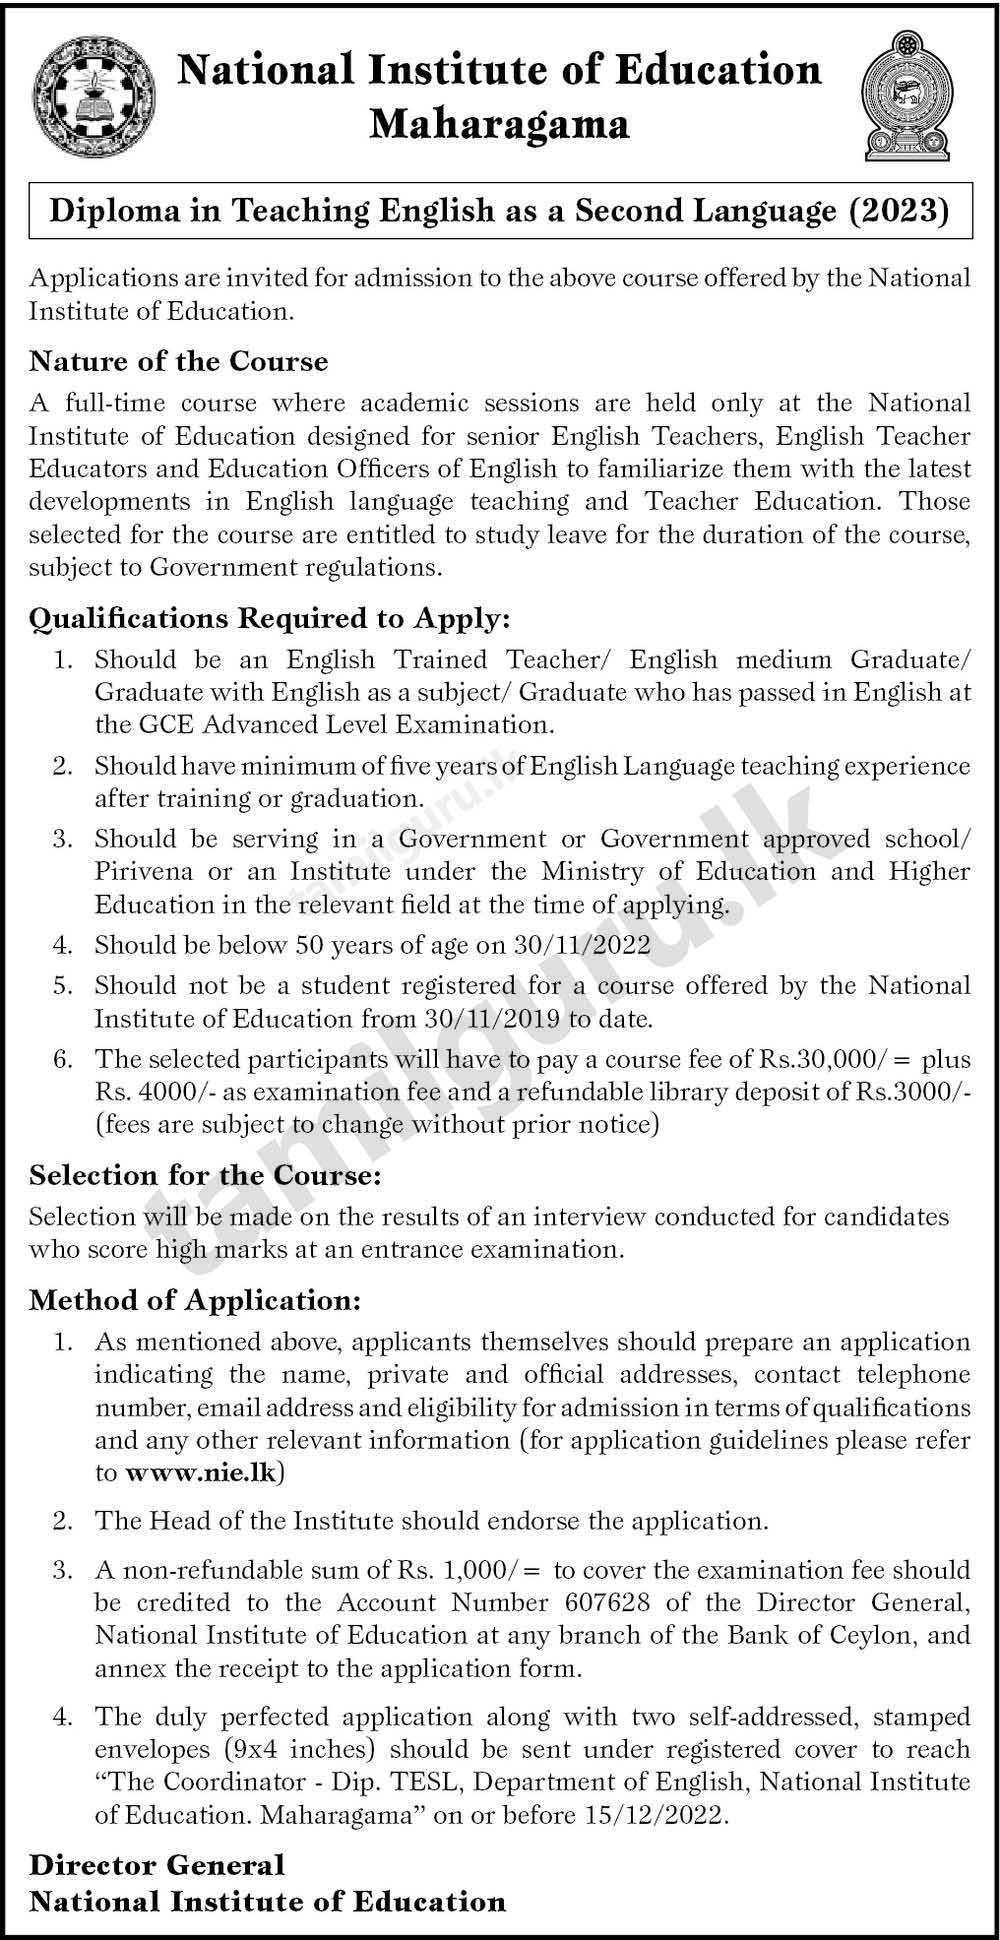 Calling Applications for Diploma in Teaching English as a Second Language (TESL) 2023 - National Institute of Education (NIE)